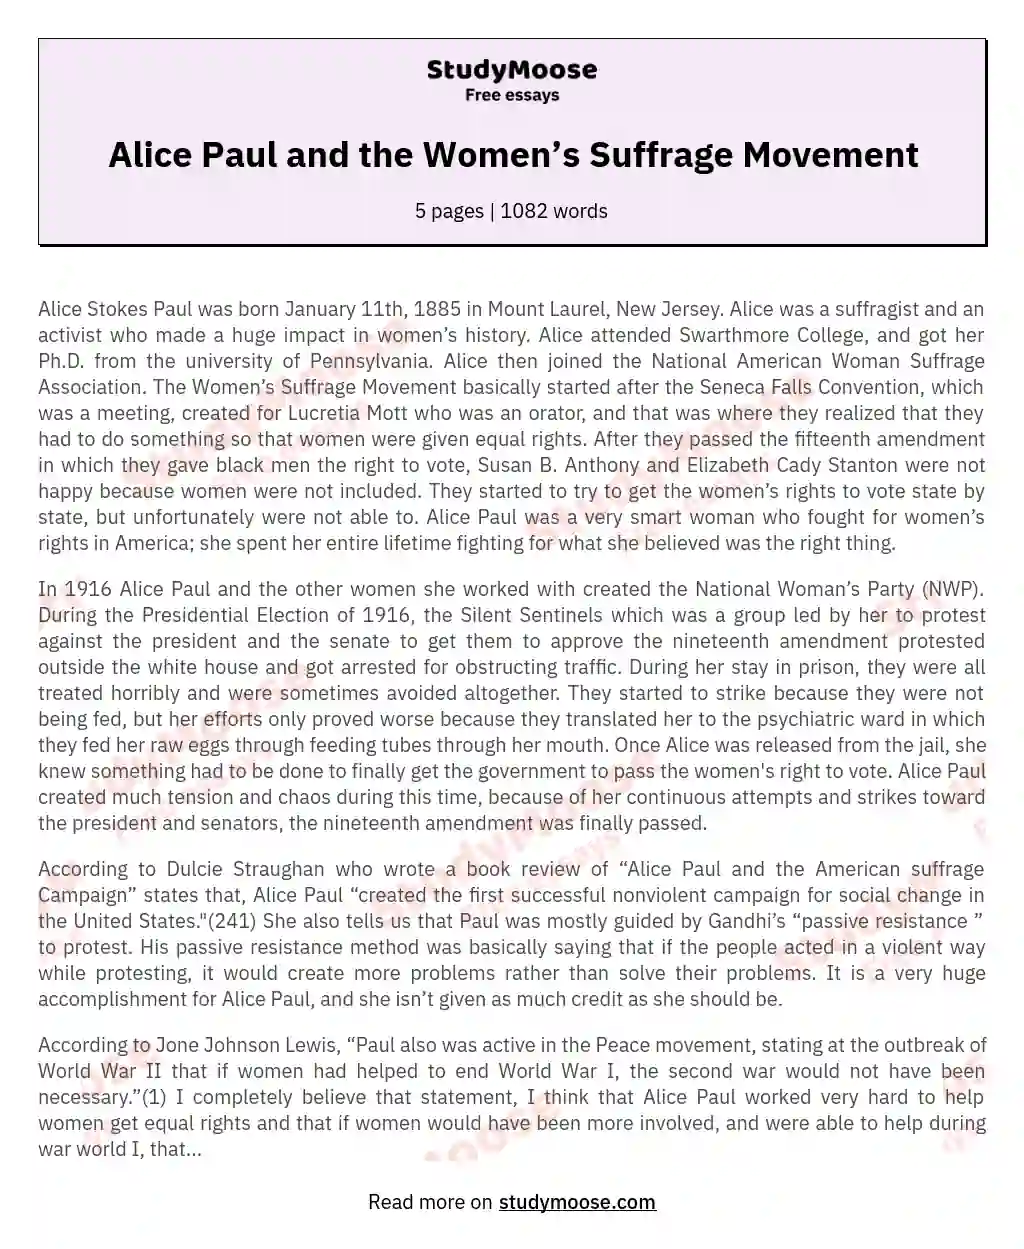 Alice Paul and the Women’s Suffrage Movement